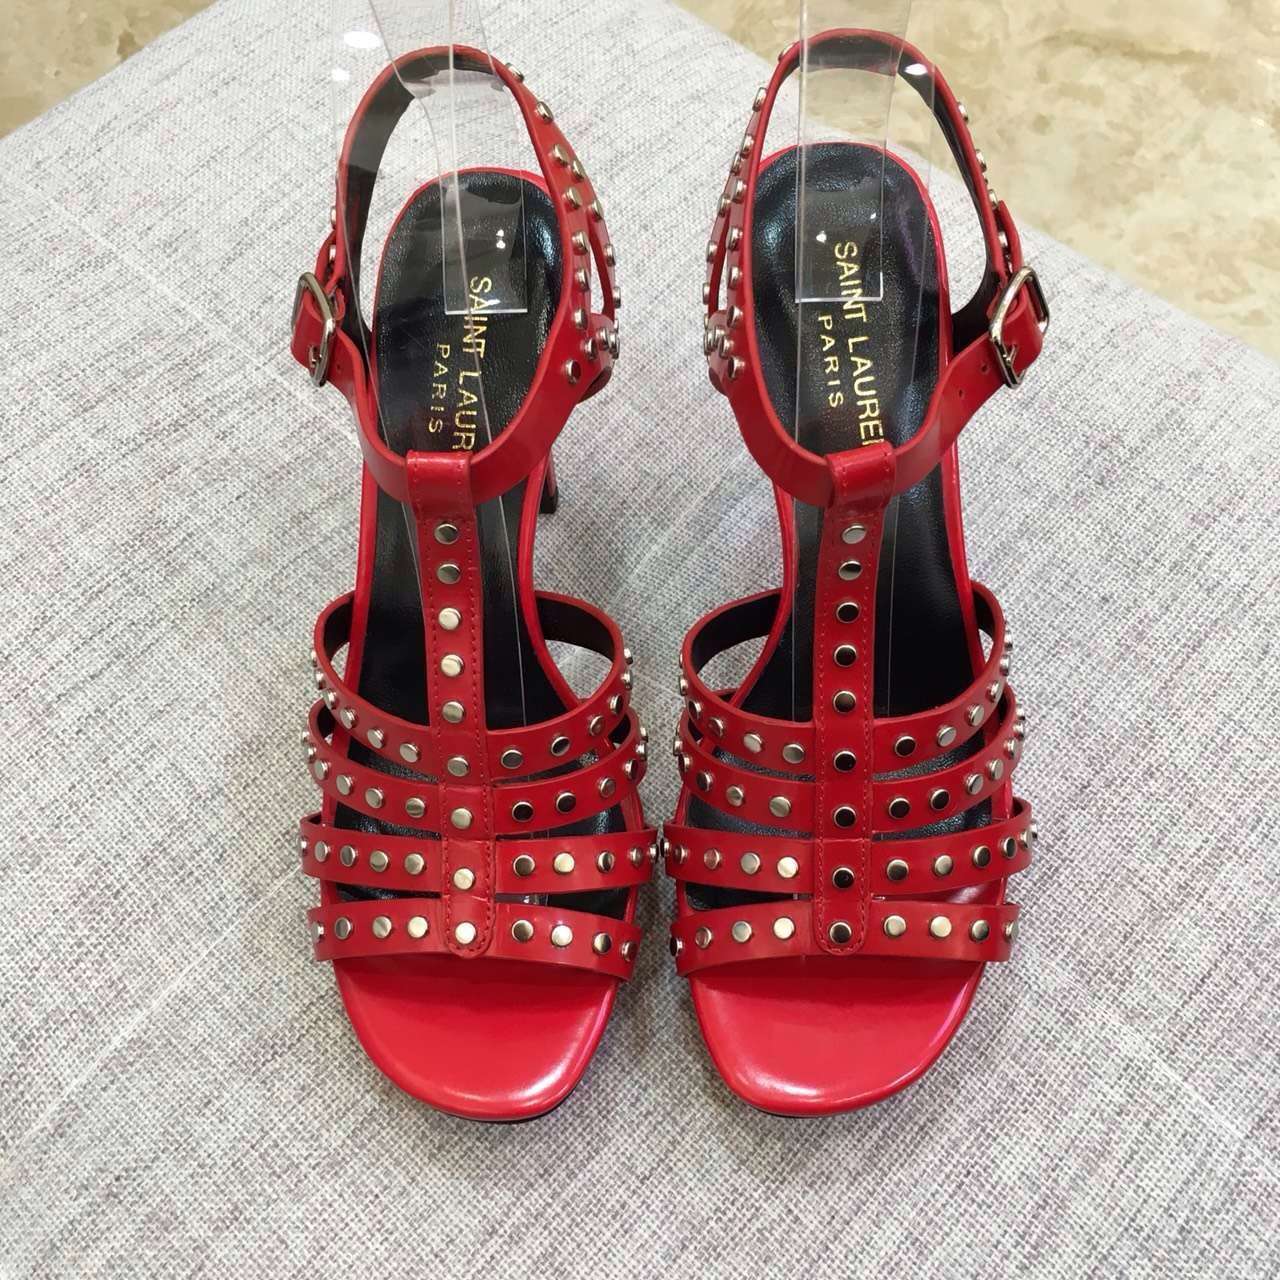 2016 Saint Laurent Shoes Cheap Sale-Saint Laurent Classic TRIBUTE 105 Studded Sandal in Red Leather and Nickel - Click Image to Close